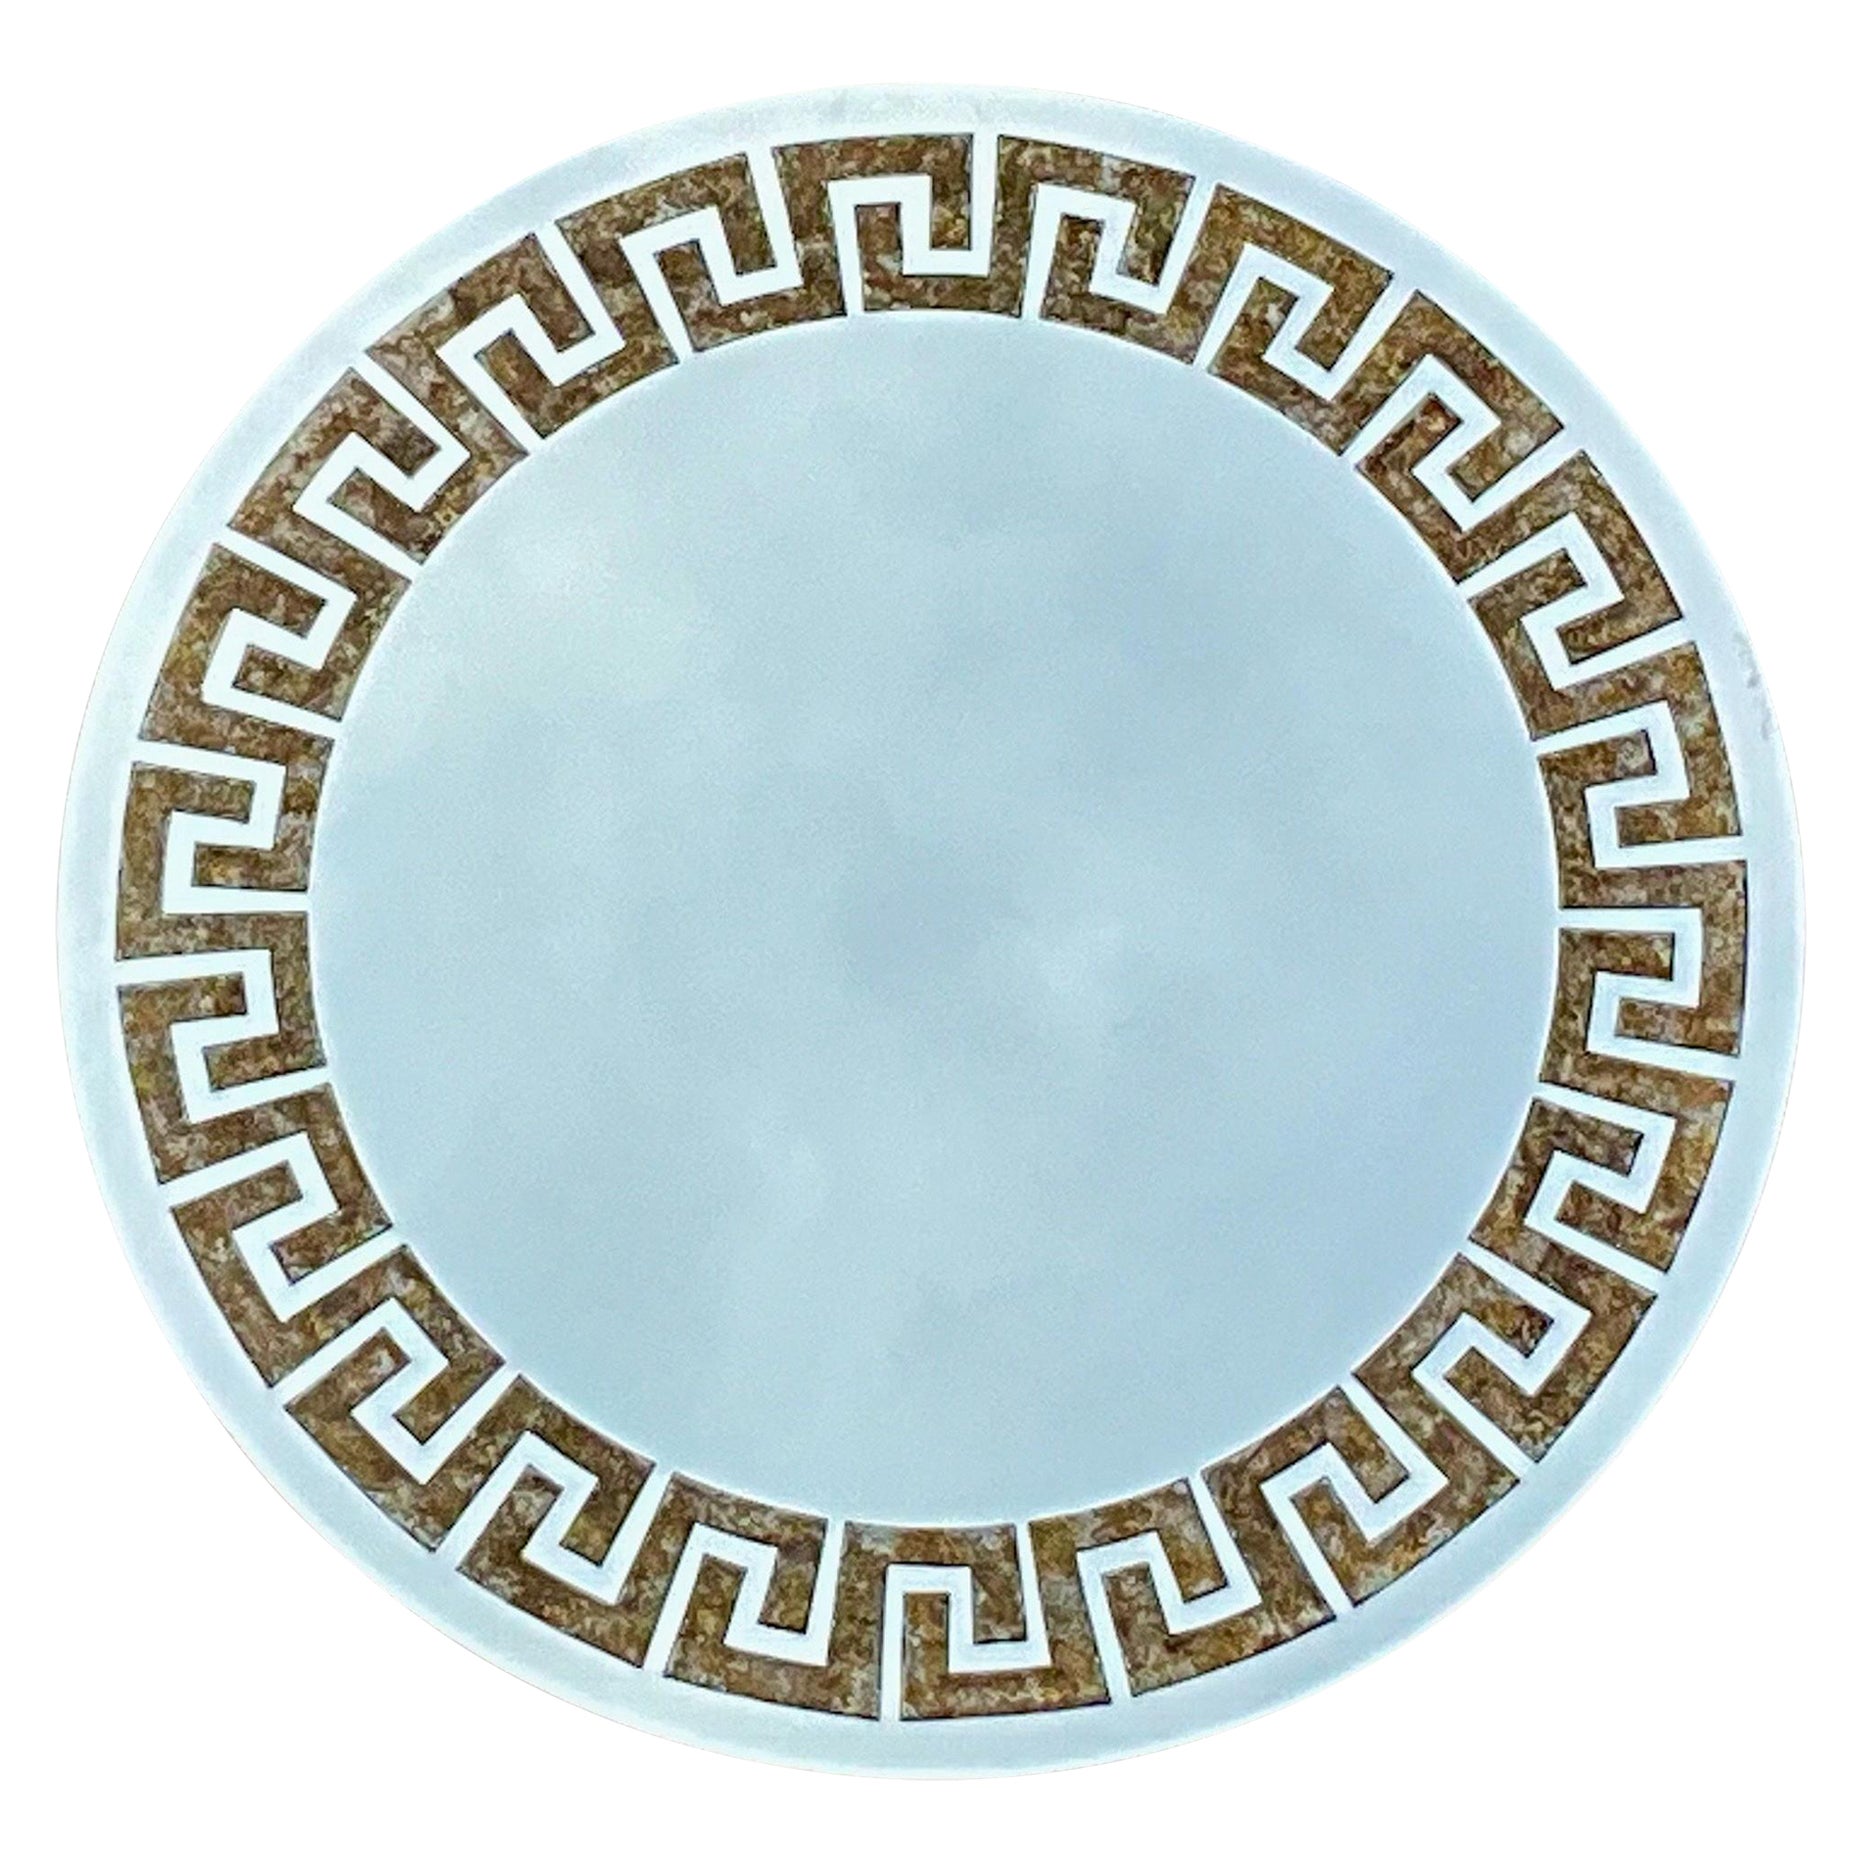 Late 20th-C. Neo-Classical Style Faux Tortoise & Greek Key Round Wall Mirror For Sale